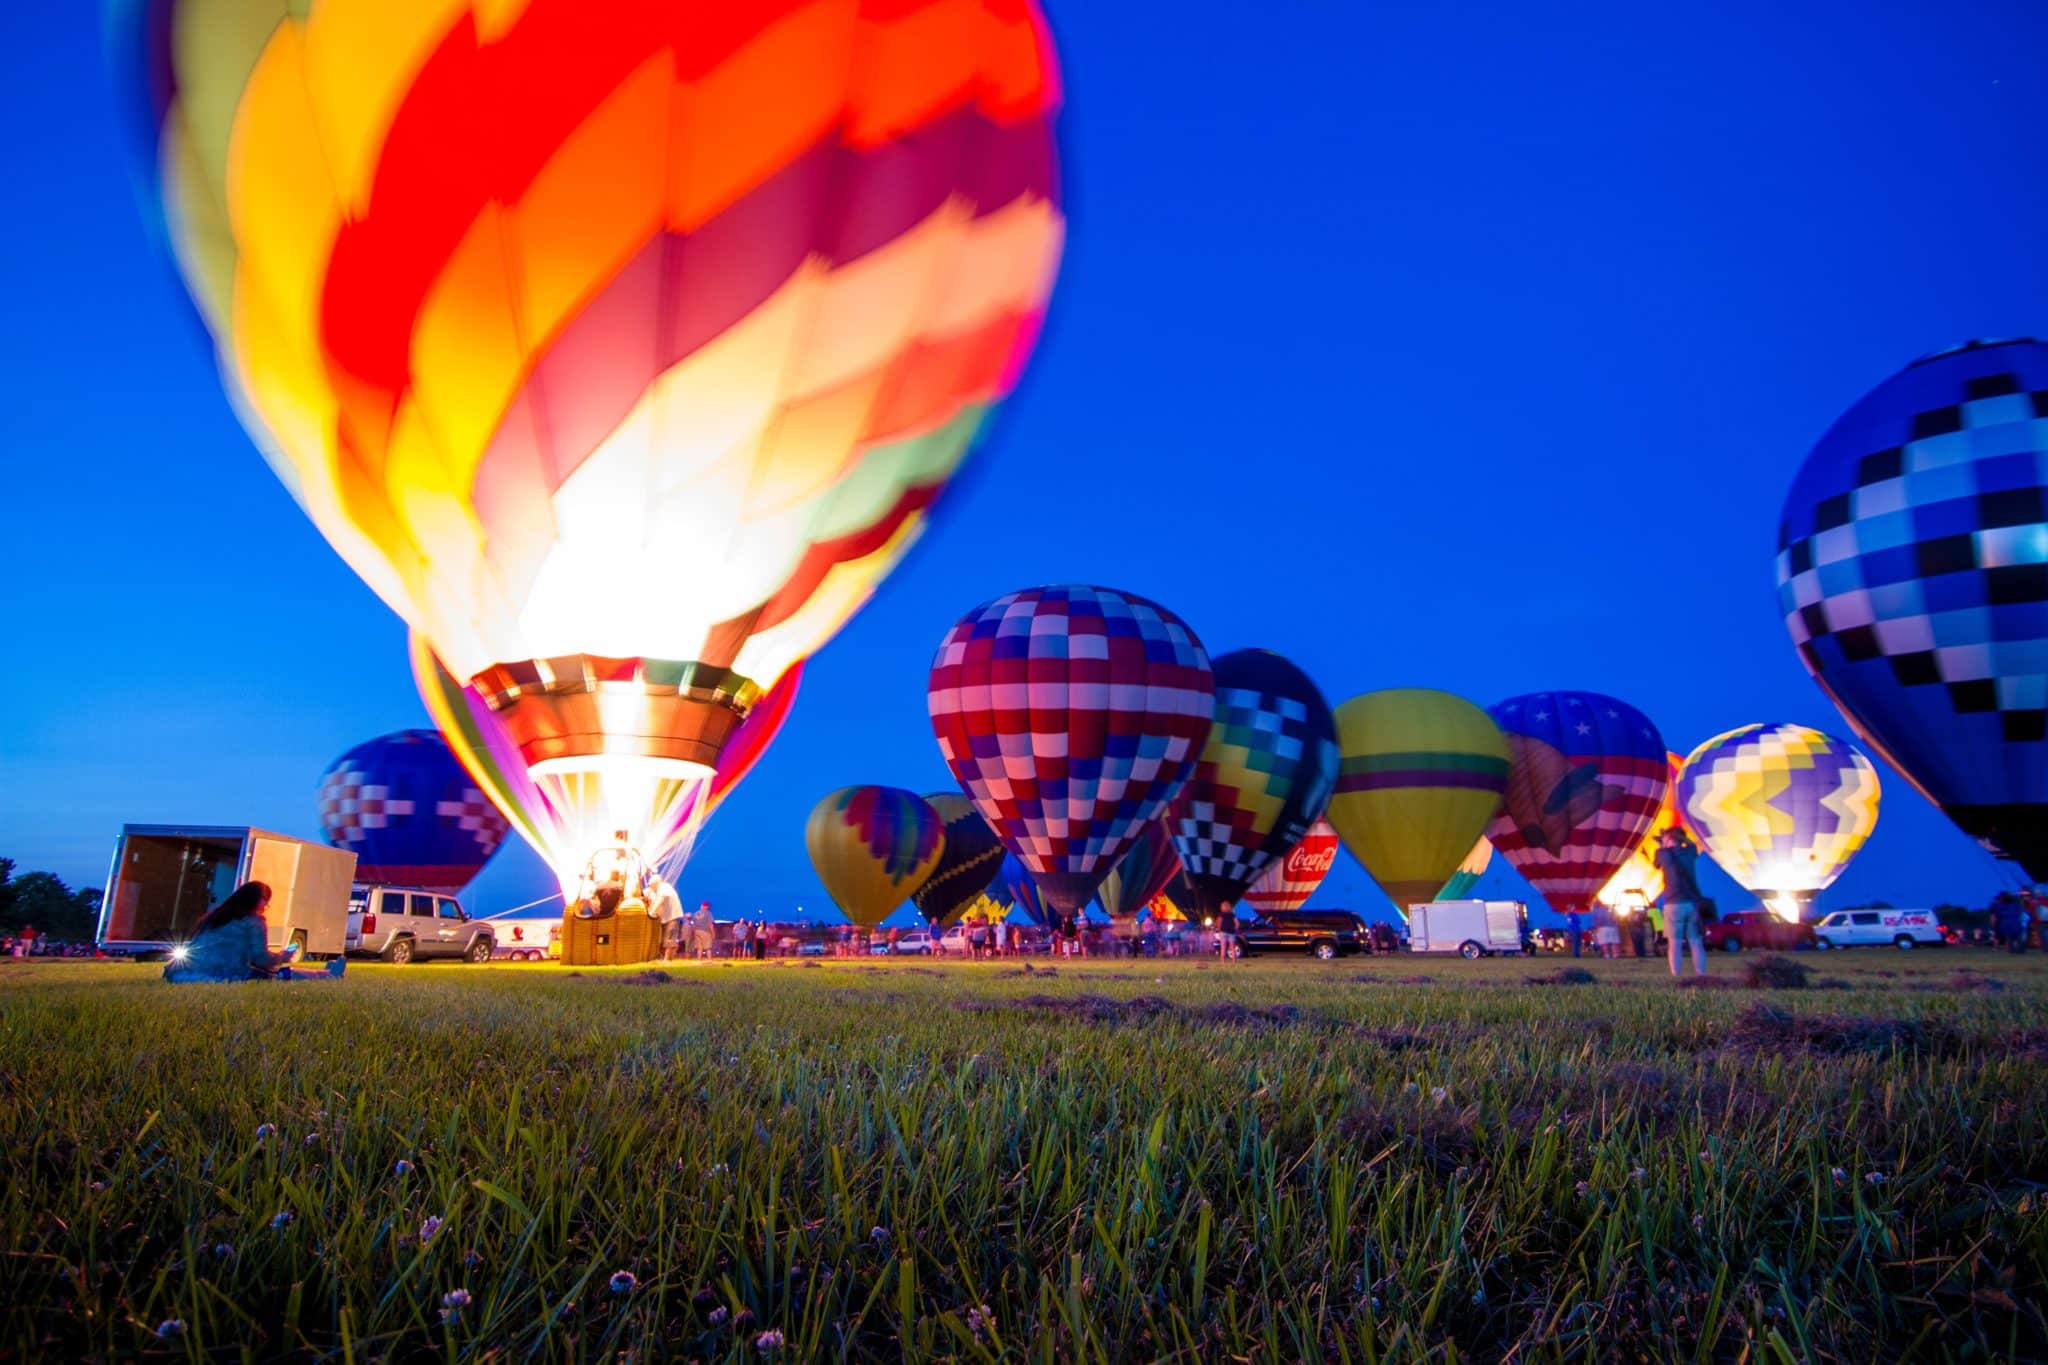 Attend the Gonzales Hot Air Balloon Festival